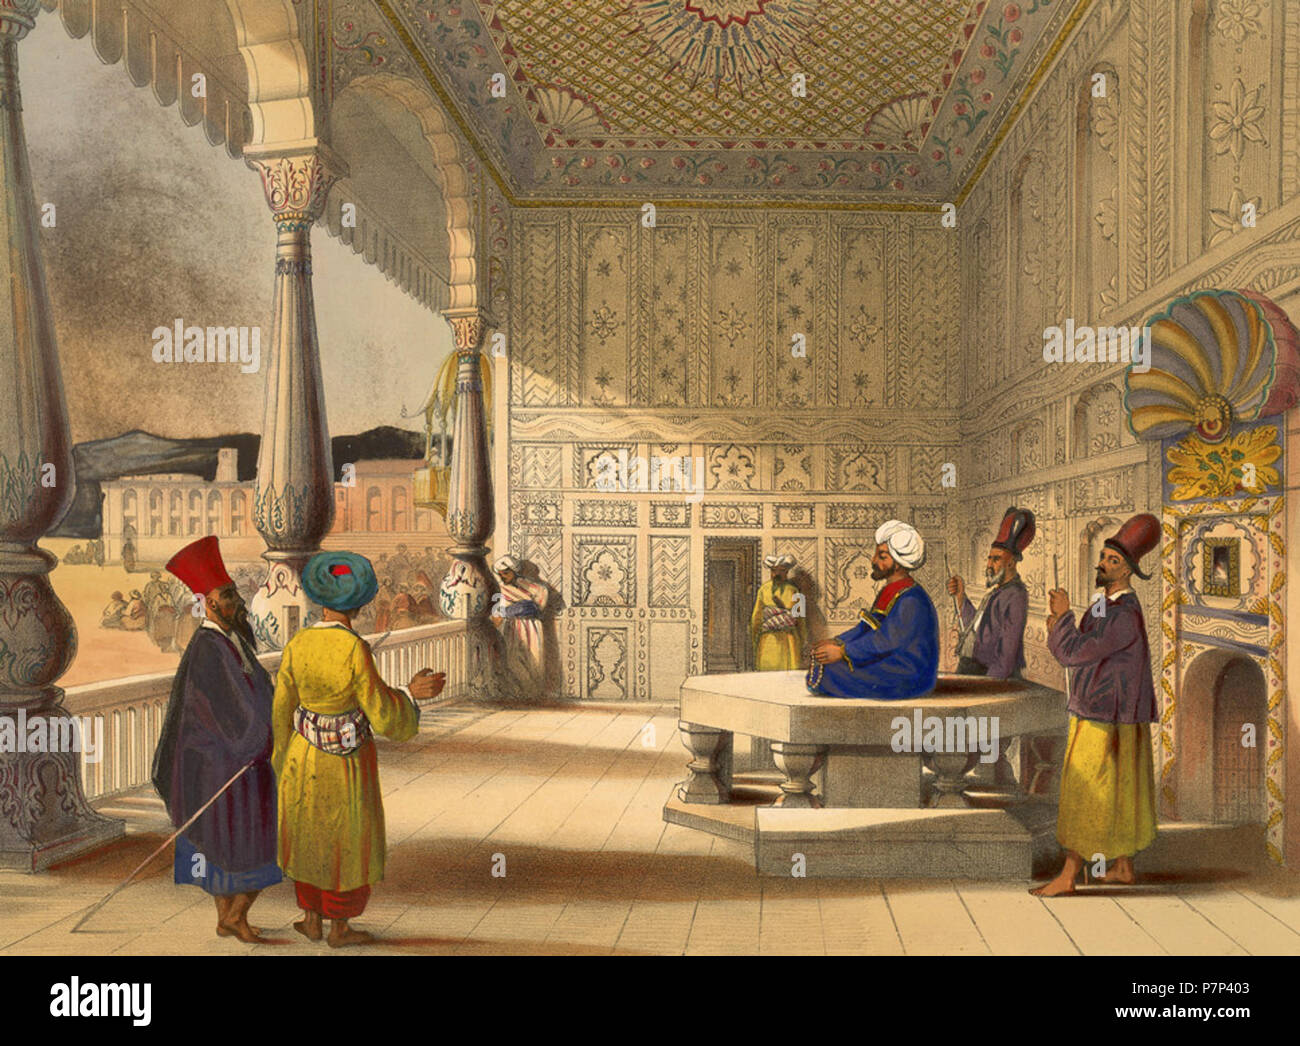 Interior of the palace of Shauh Shujah Ool Moolk, Late King of Cabul This lithograph is taken from plate 3 of 'Afghaunistan' by Lieutenant James Rattray. This scene shows Shah Shuja in 1839 after his enthronement as Emir of Afghanistan in the Bala Hissar (fort) of Kabul. Rattray wrote: 'The Shah was a man of great personal beauty, and so well got up, that none could have guessed his age.' He continued: 'the wild grandeur of the whole pageantry baffles description.' The population watched Shuja's grand entry in absolute silence. He was then seated on a white and reputedly ancient marble throne. Stock Photo